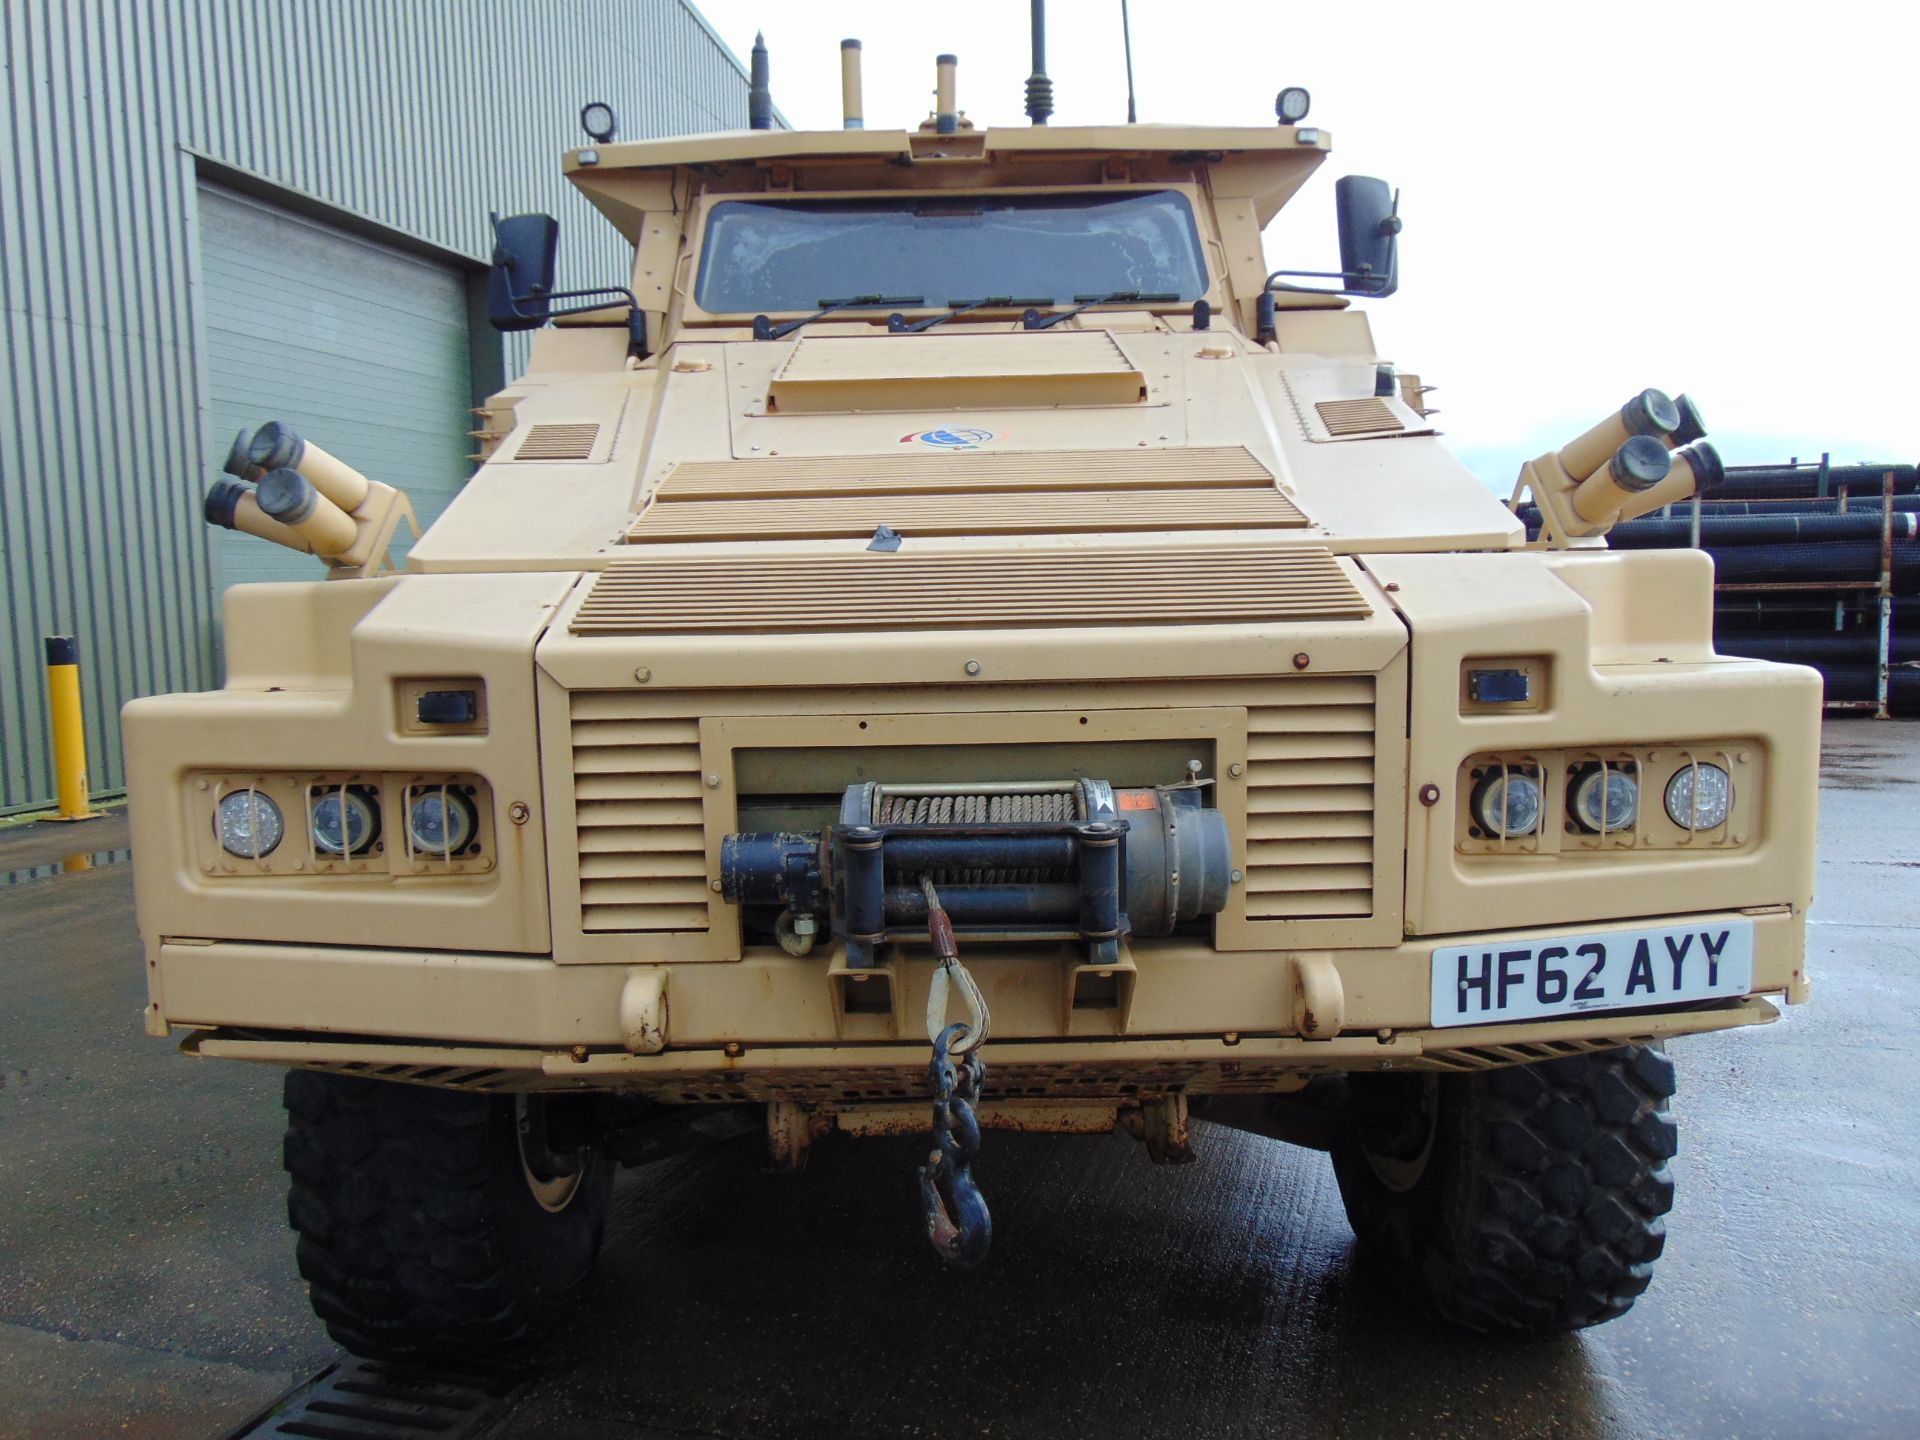 2012 RANGER 8x8 Armoured Personnel Carrier ONLY 1,354 MILES! - Image 32 of 46